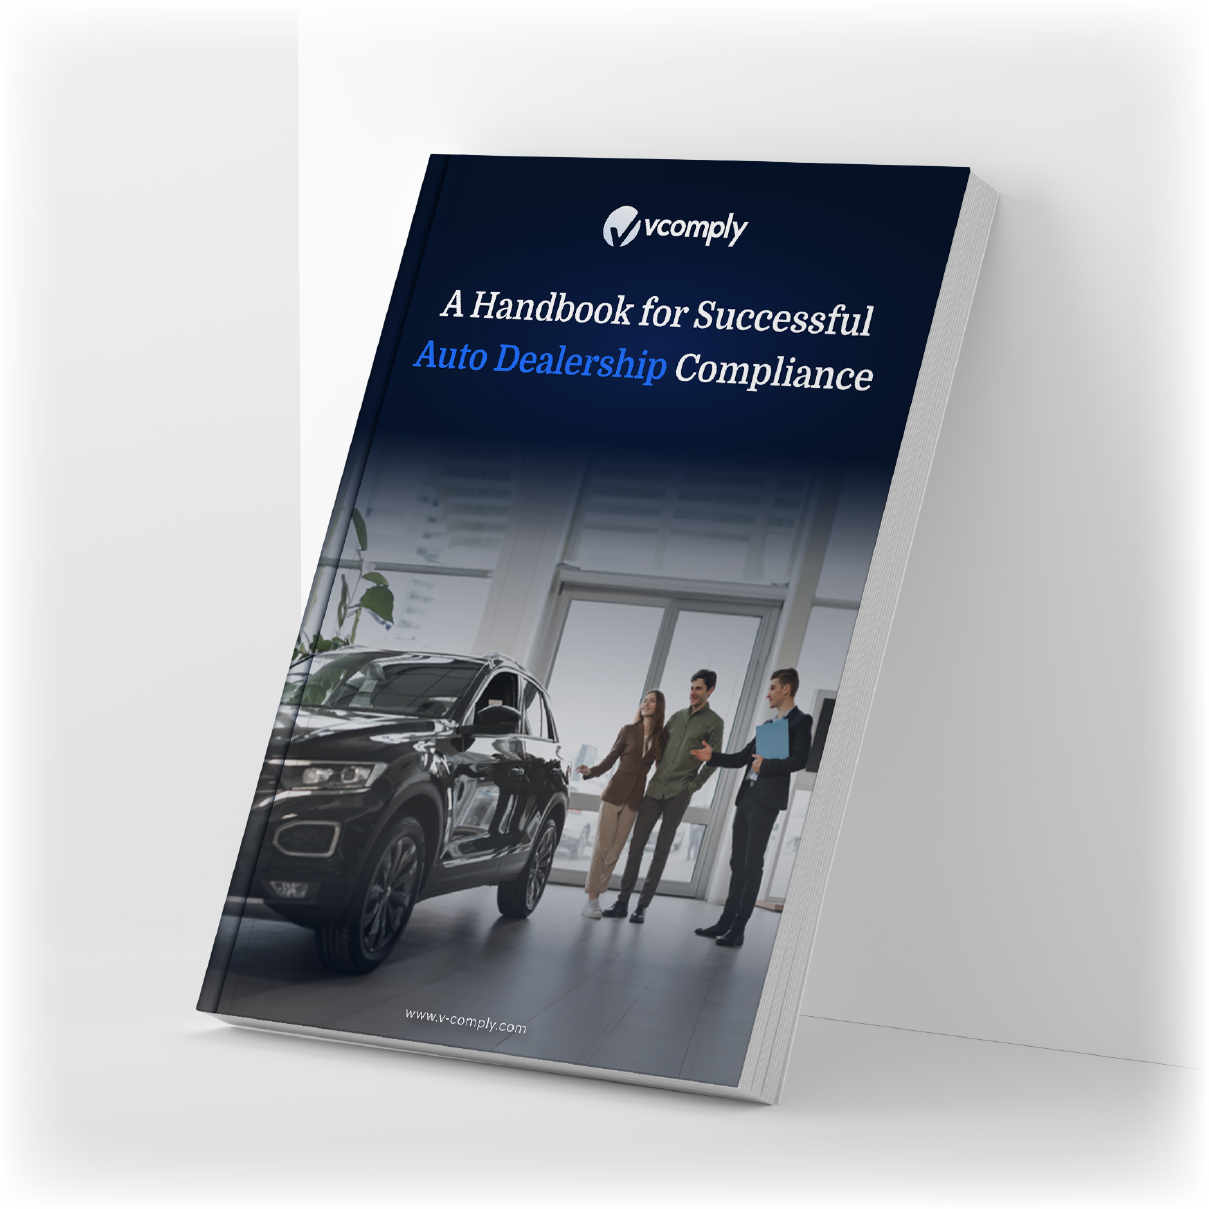 A Handbook for Successful Auto Dealership Compliance-Cover.1-01